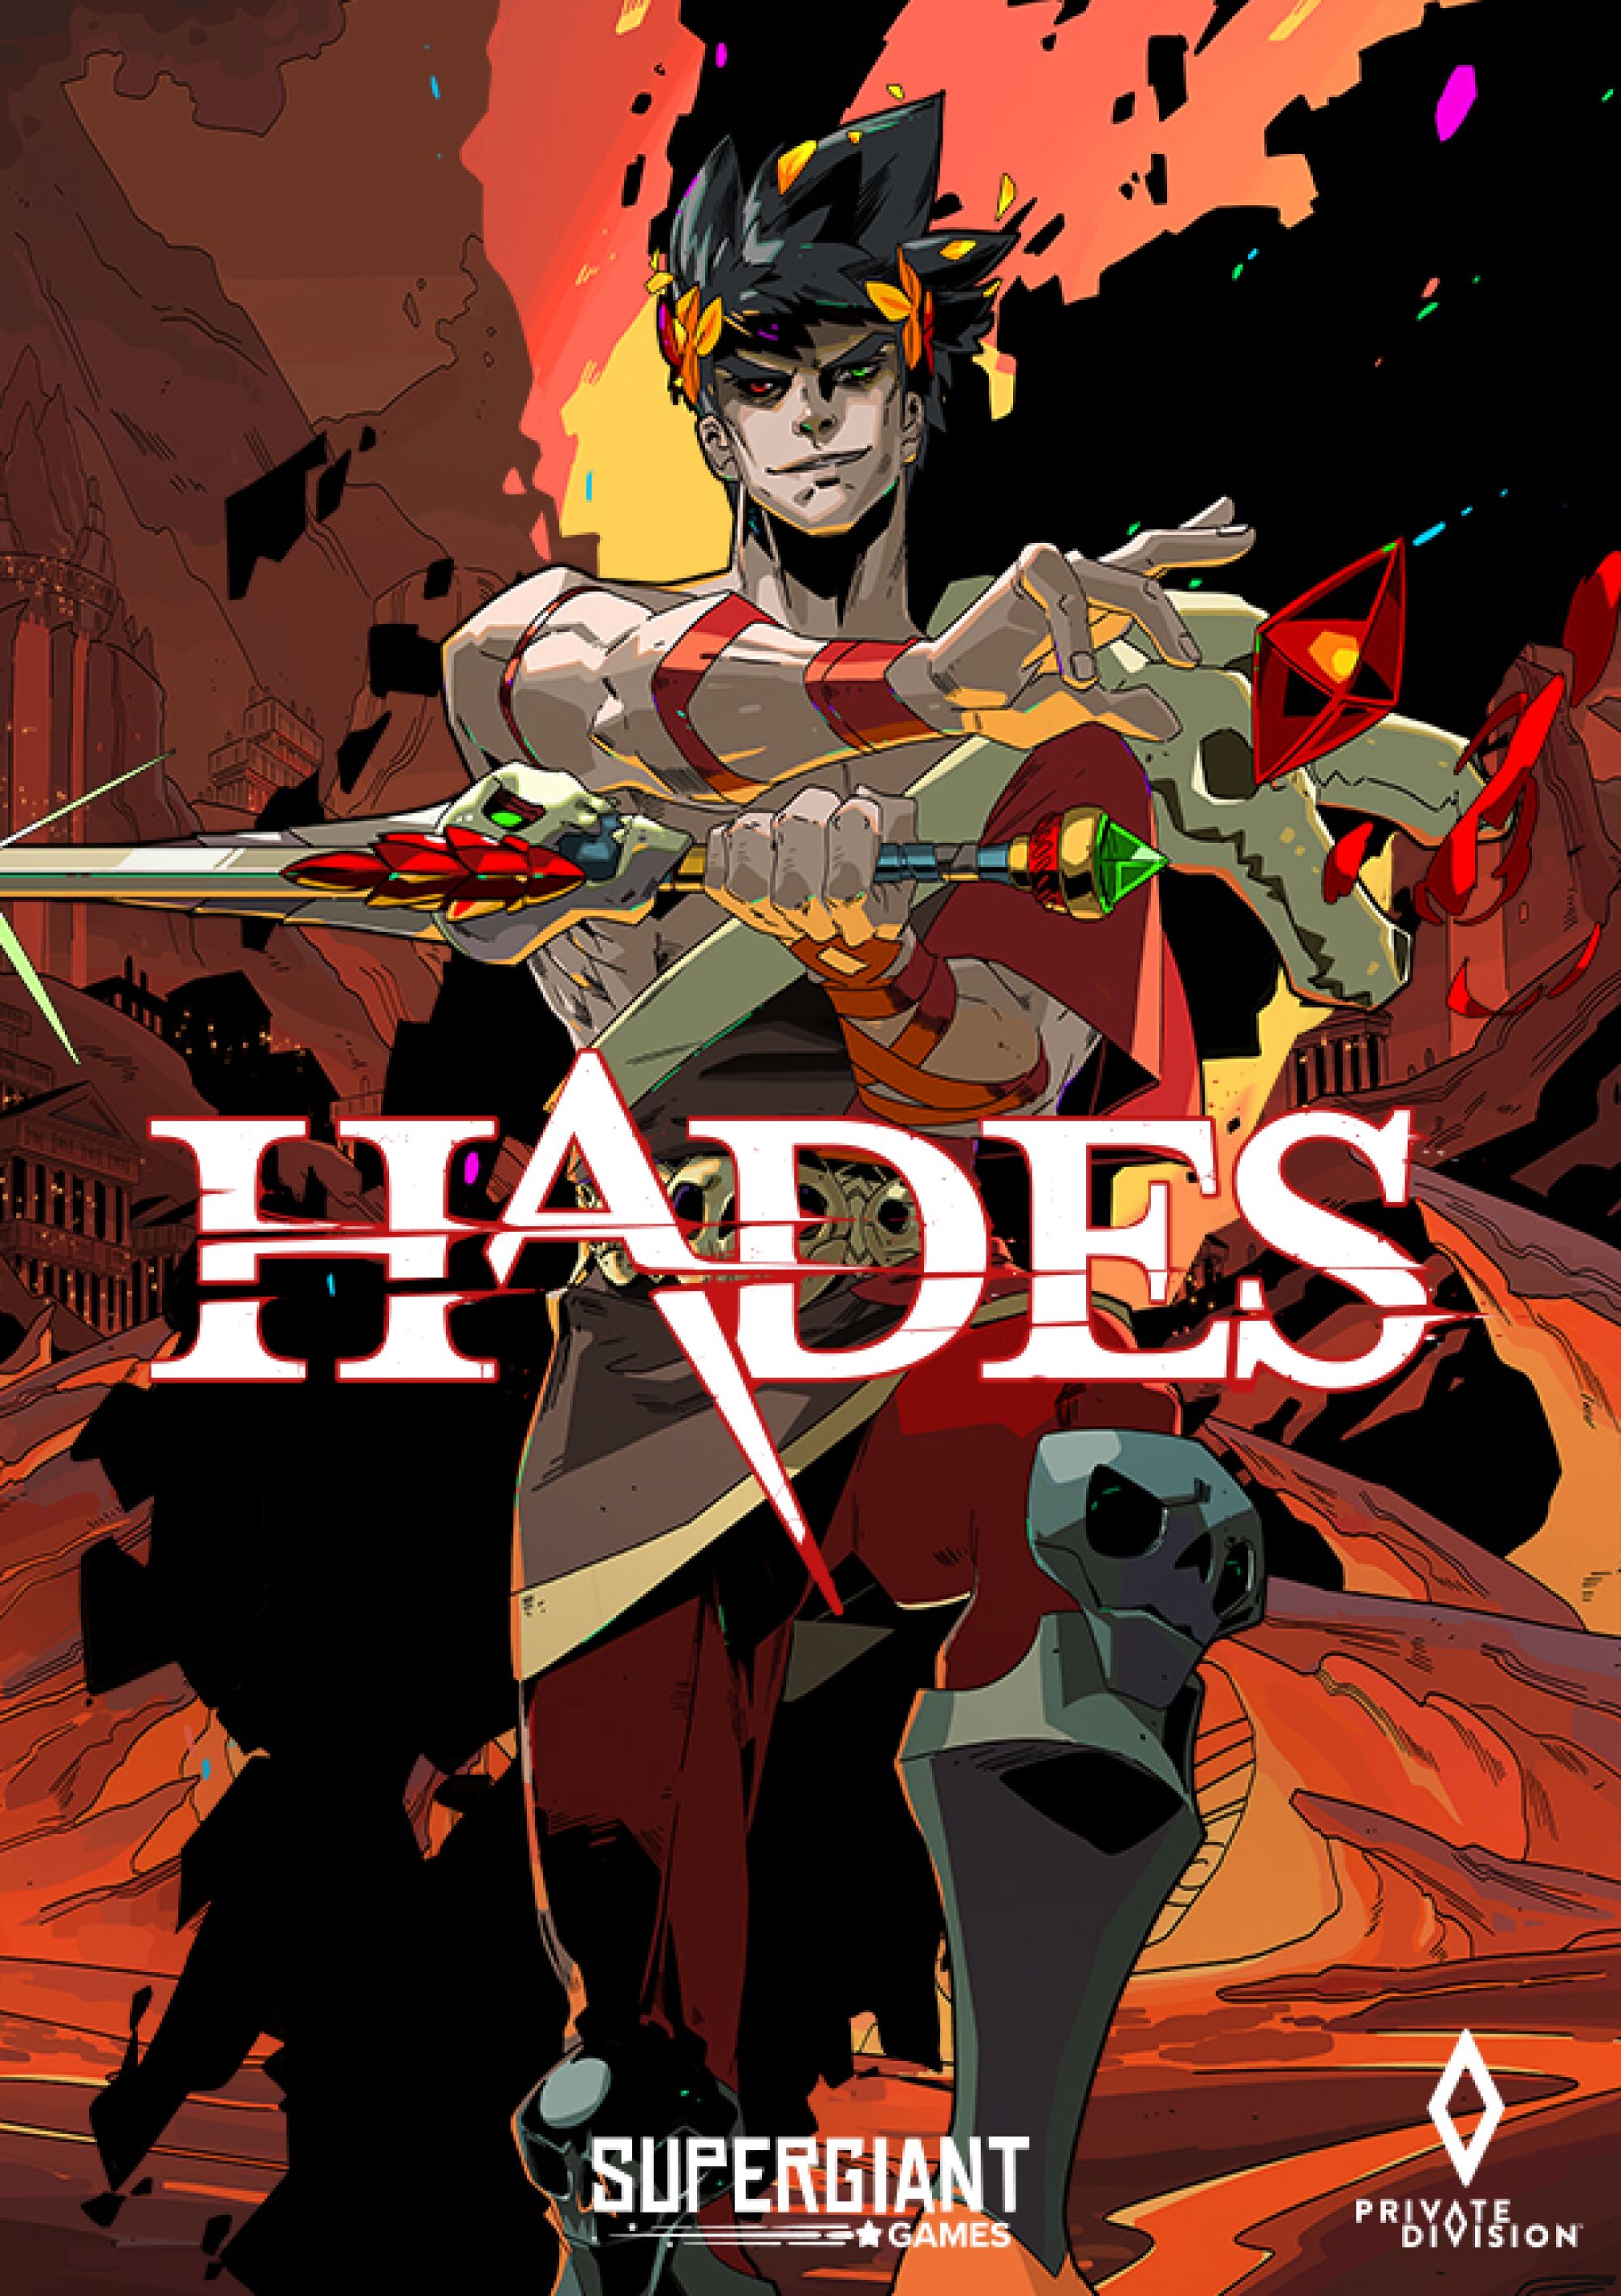 The cover of "Hades" features a fearsome mythological figure.